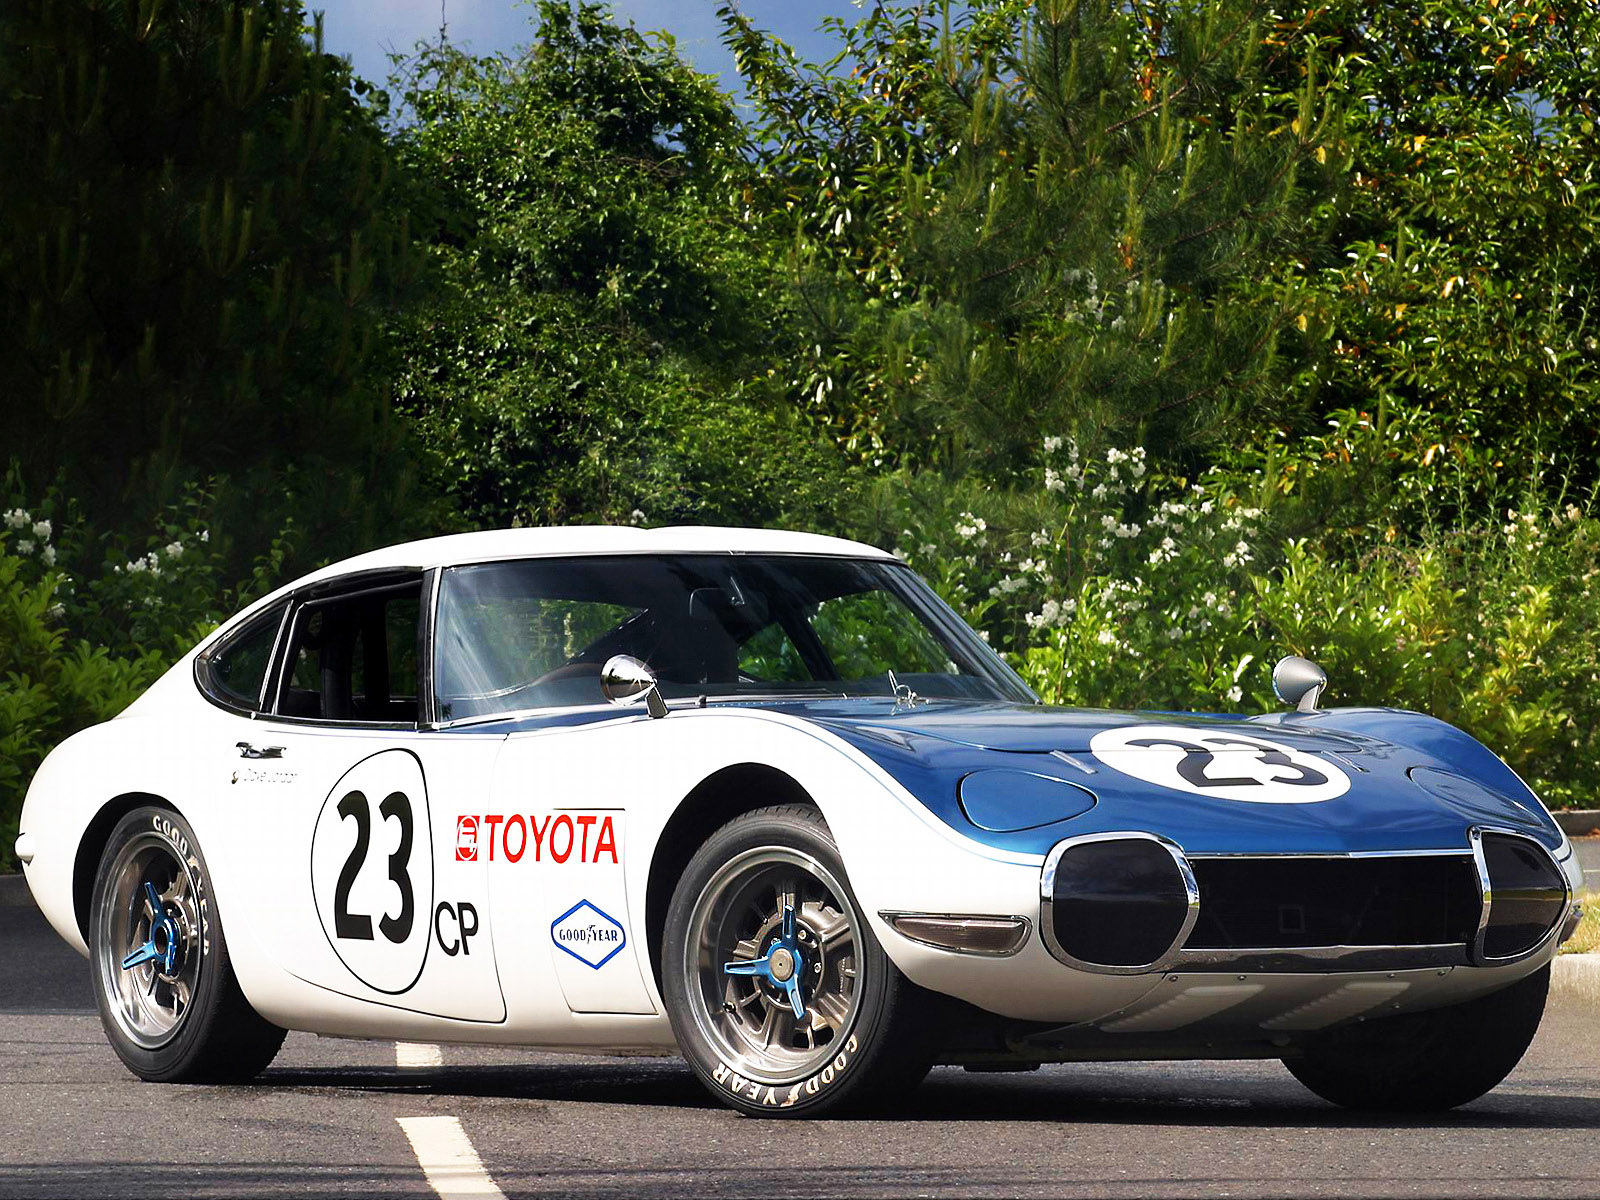 Toyota 2000 gt Shelby